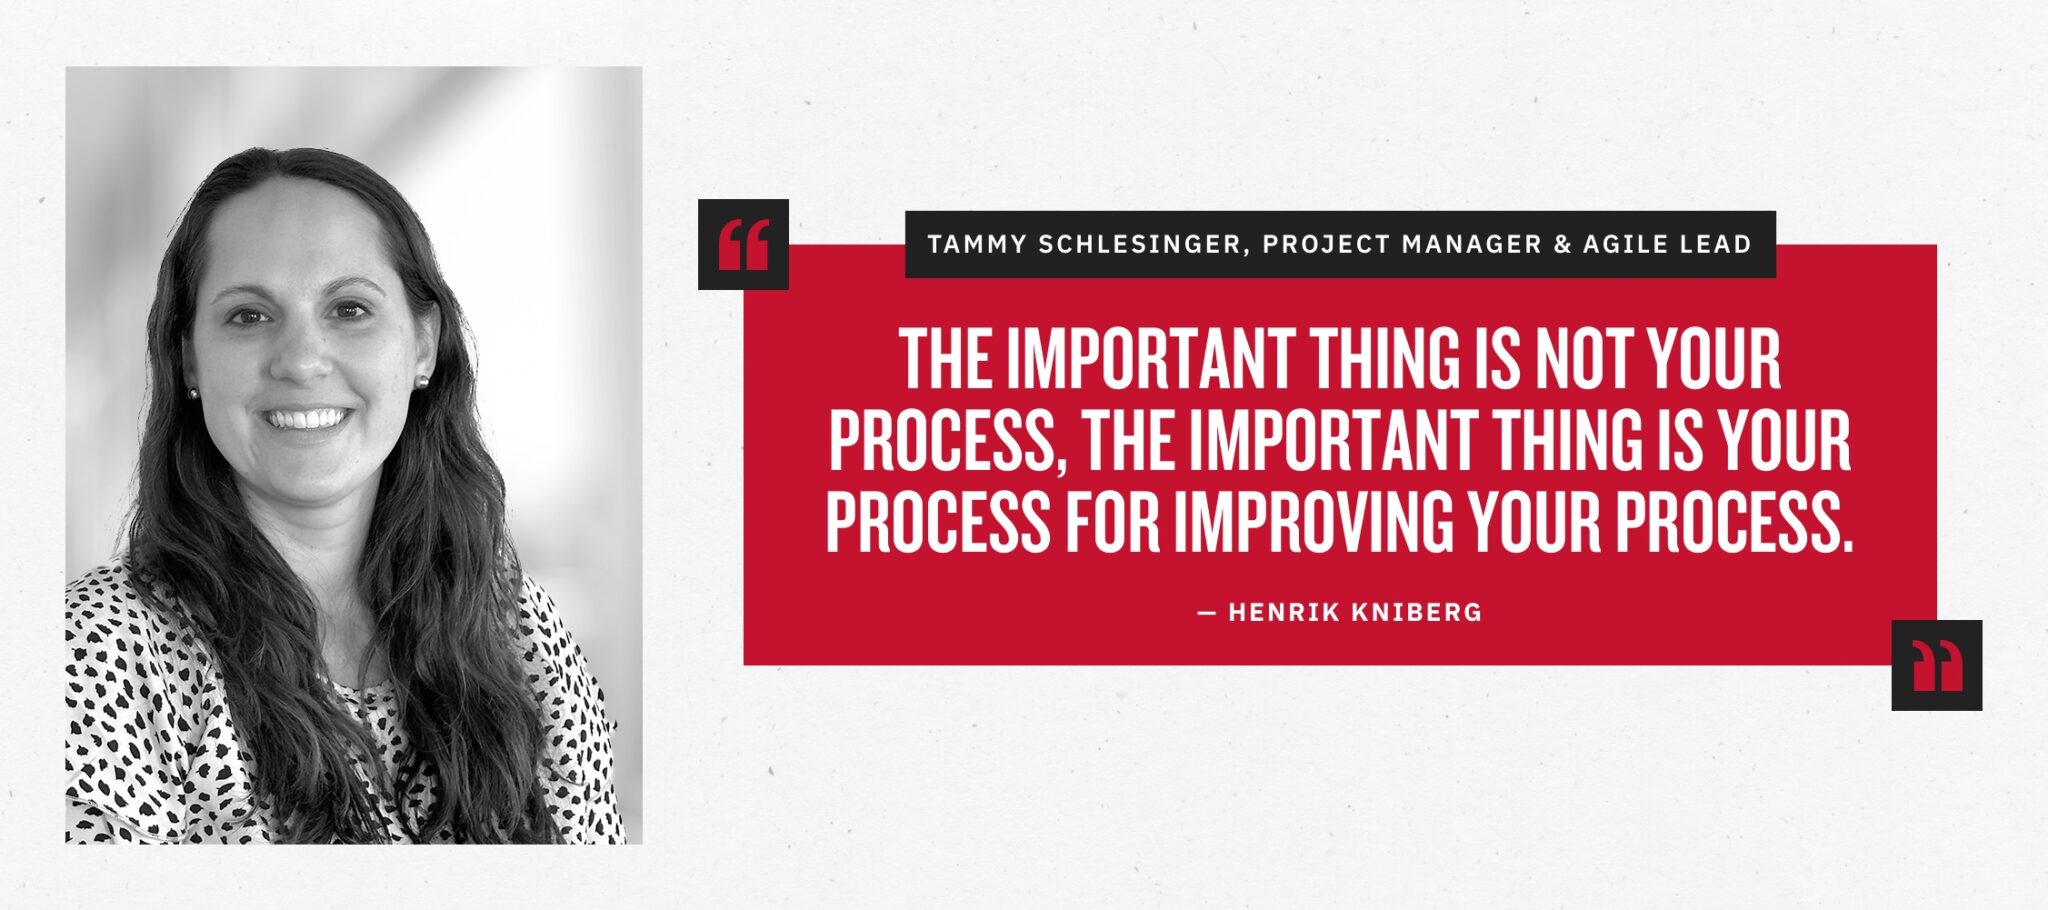 Tammy Schlesinger, Project Manager & Agile Lead 